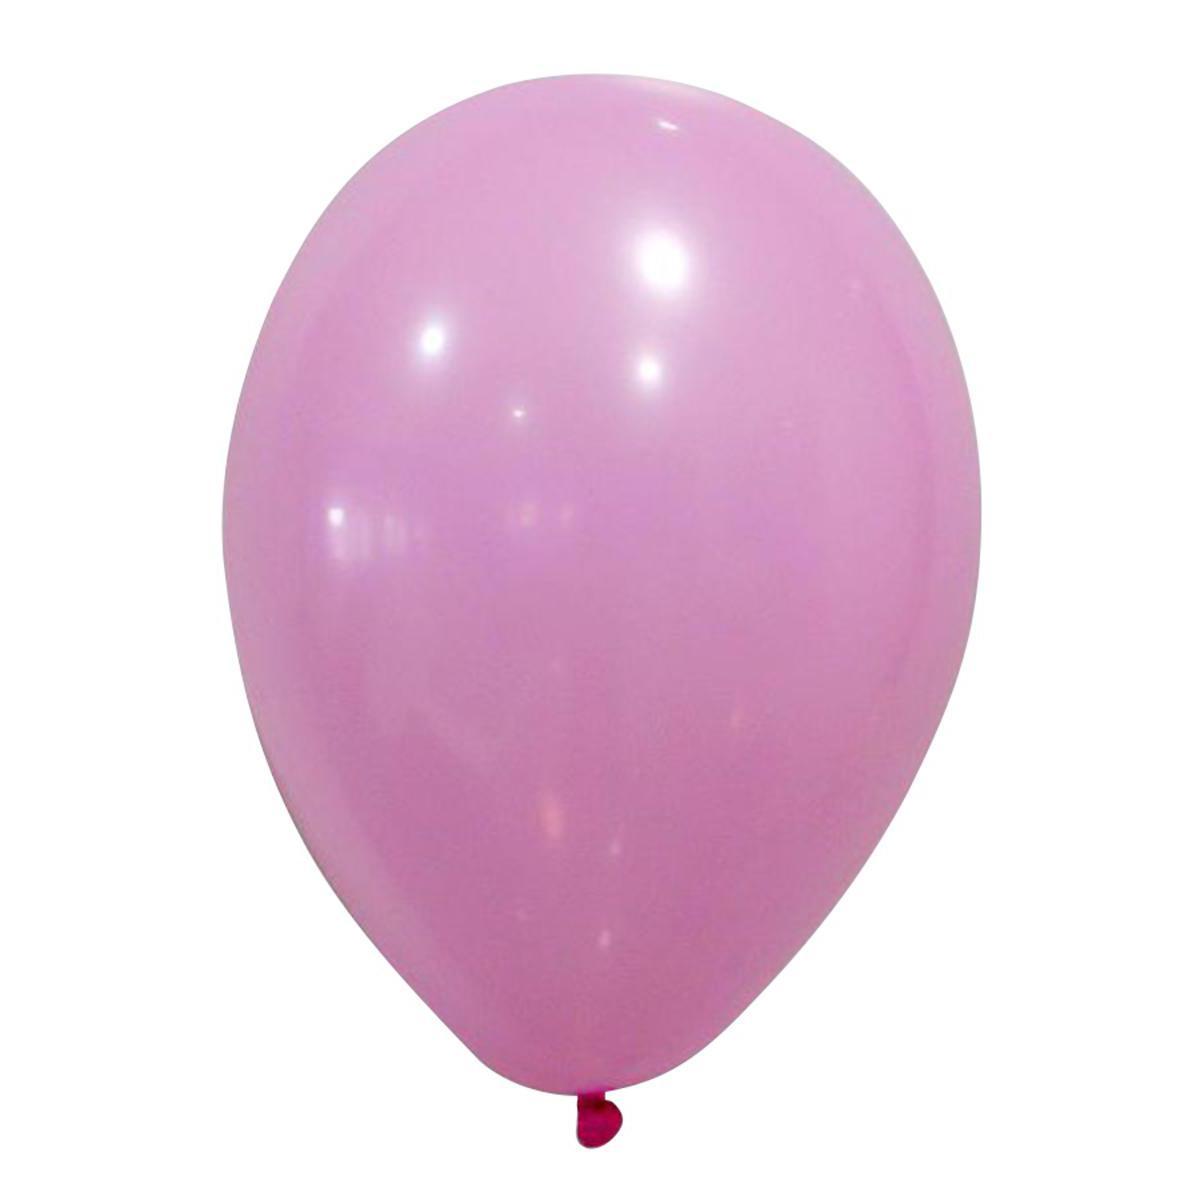 10 ballons gonflables opaques - Latex - ø 25 cm - Rose